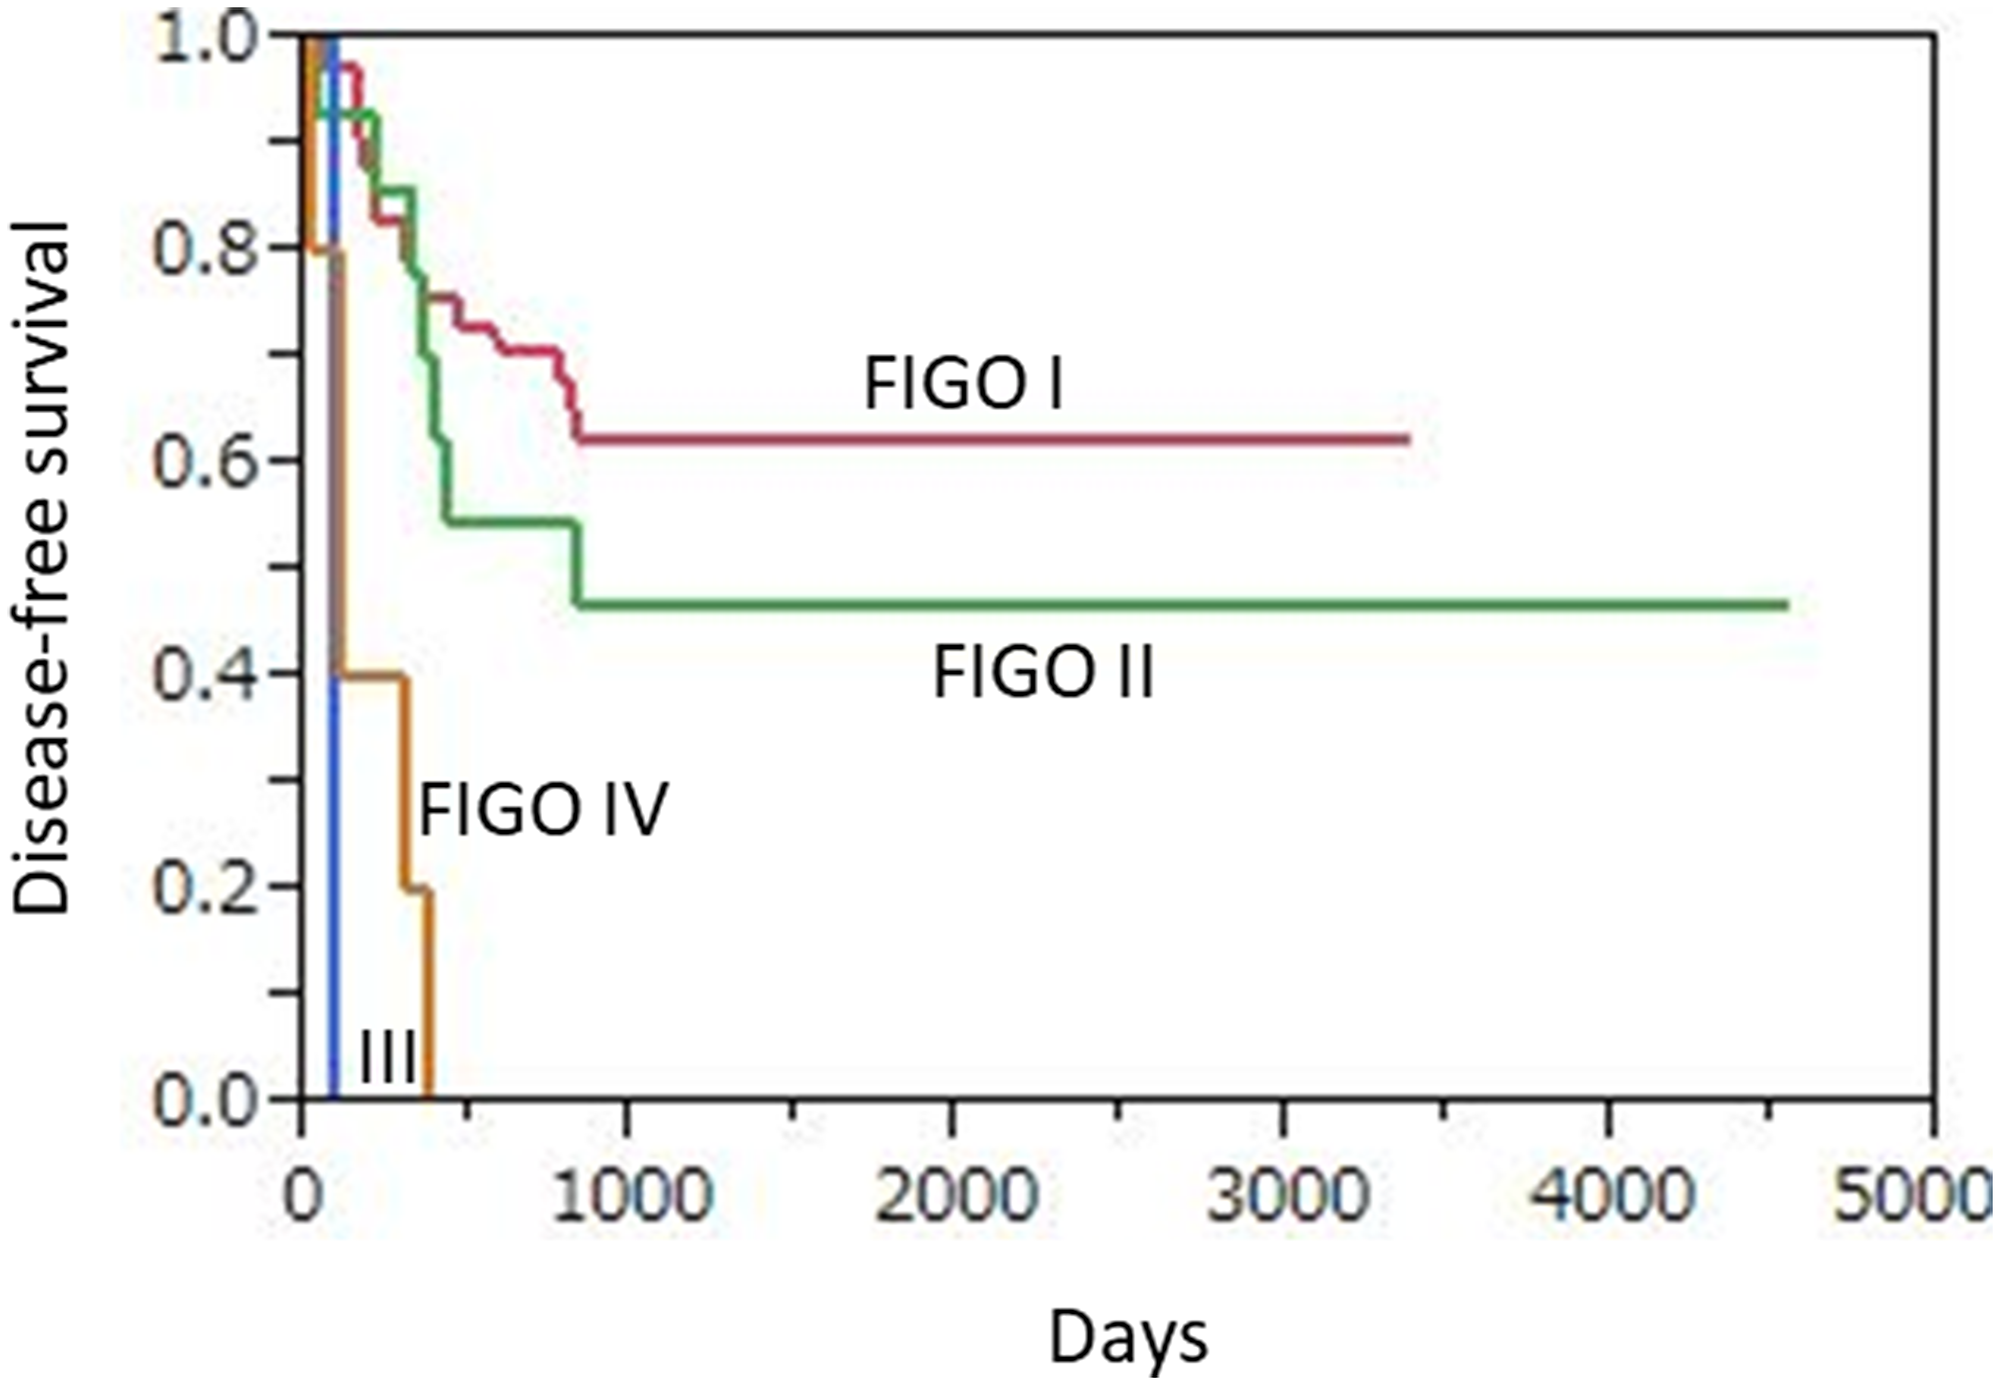 Kaplan-Meier disease-free survival curves for 62 uterine cervical neuroendocrine carcinoma patients according to FIGO stage.